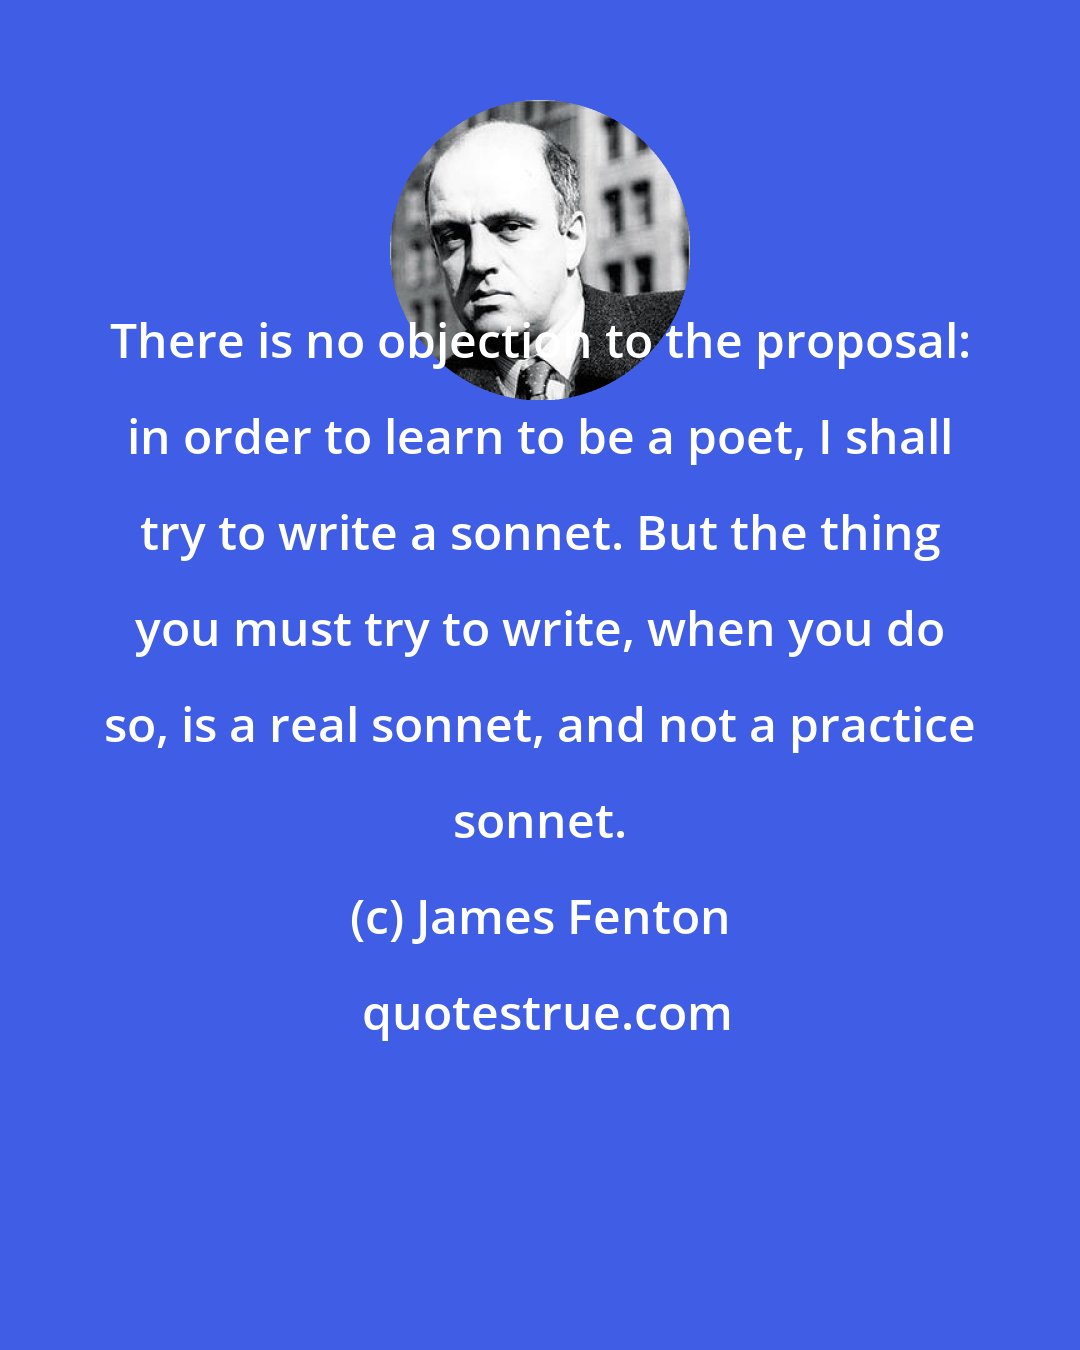 James Fenton: There is no objection to the proposal: in order to learn to be a poet, I shall try to write a sonnet. But the thing you must try to write, when you do so, is a real sonnet, and not a practice sonnet.